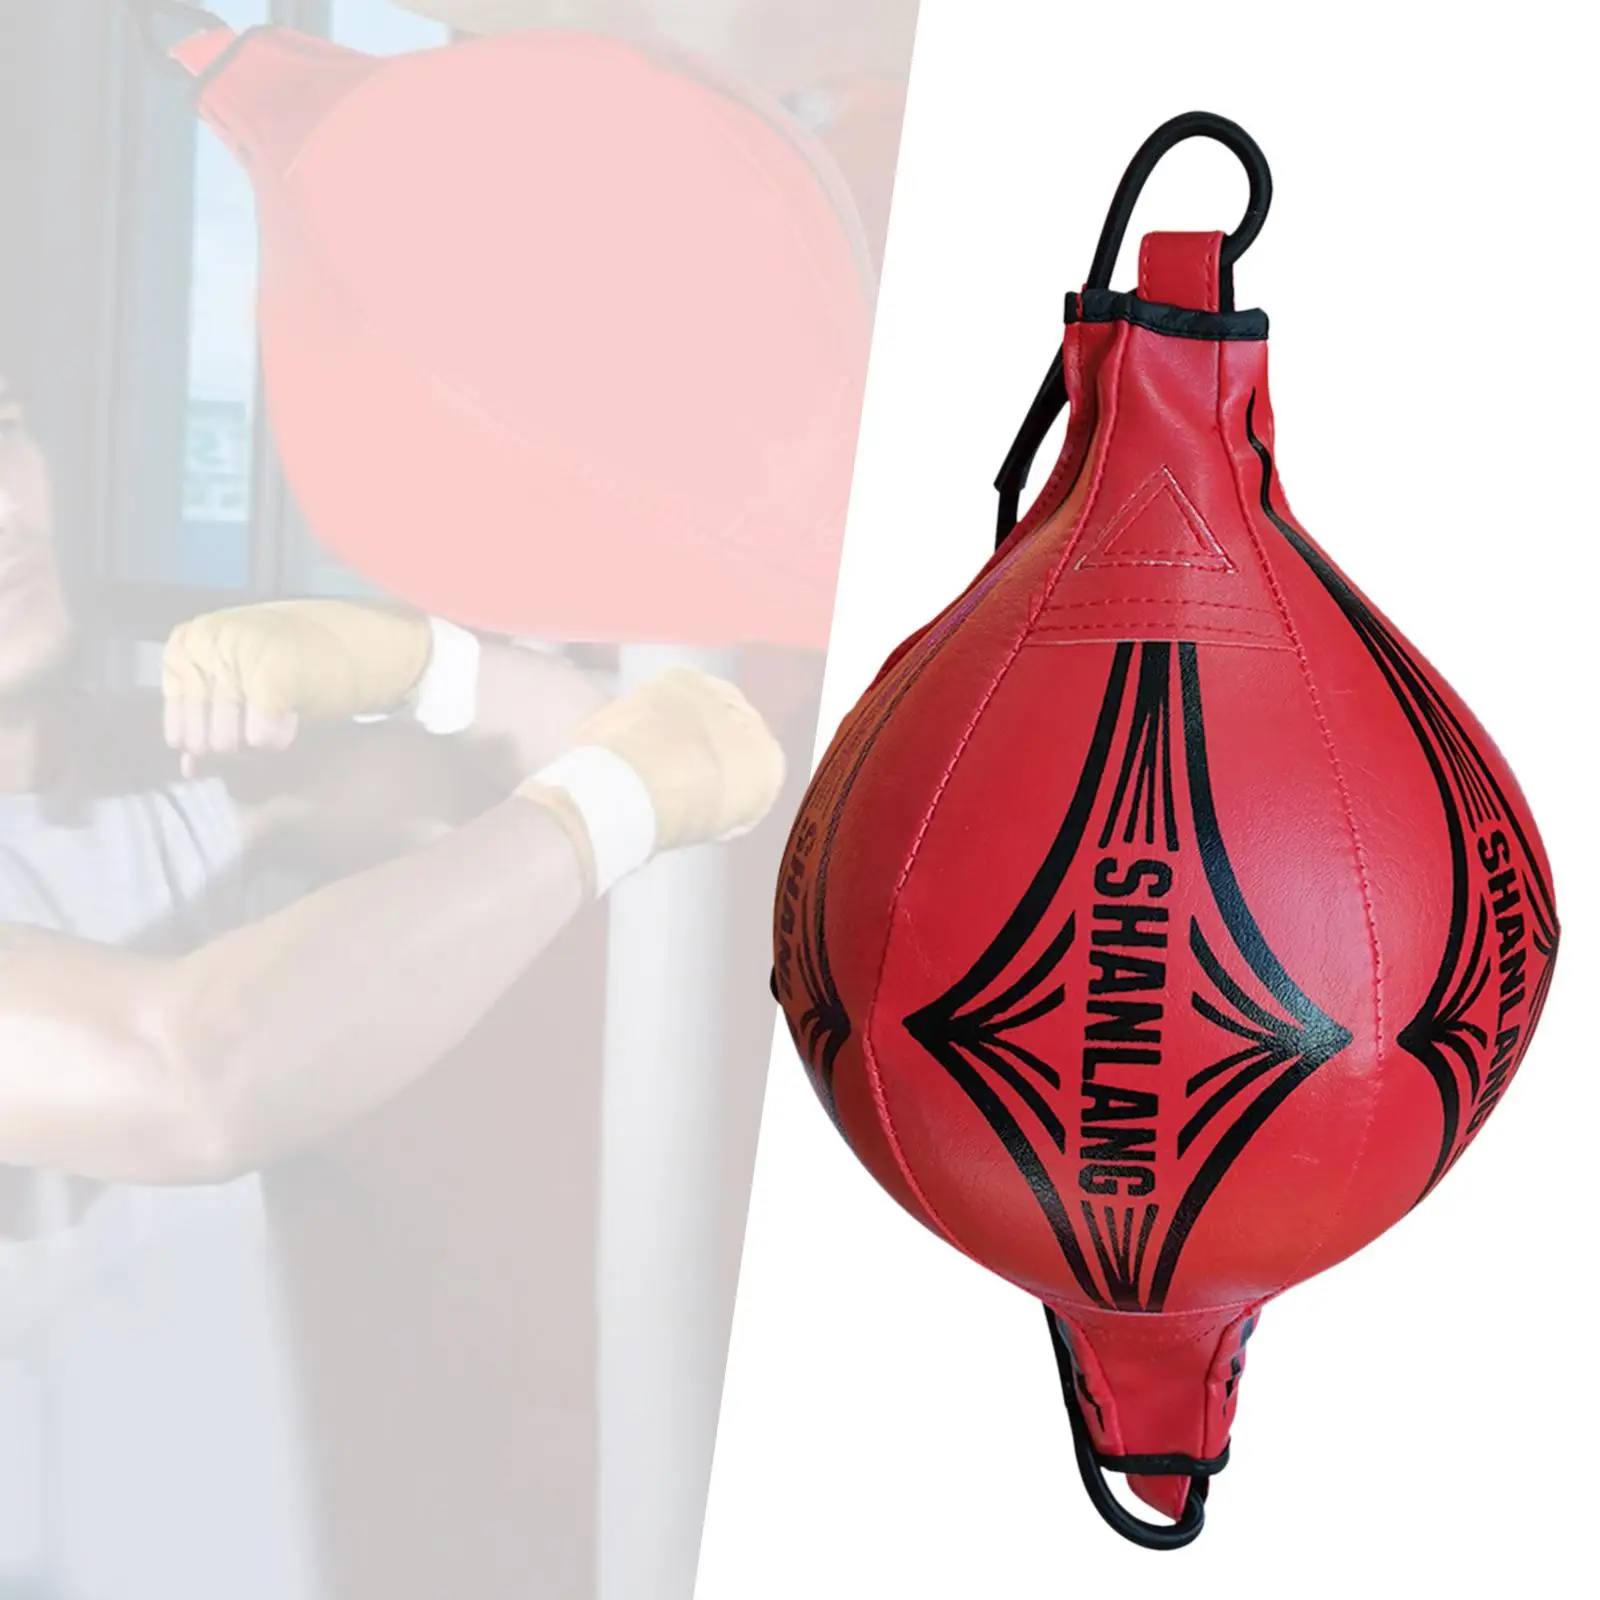 PU Leather Boxing Punching Speed Bag Rhombic Shape Reaction Speed Balls for Training Home Fitness Equipment Sparring Adult Kids